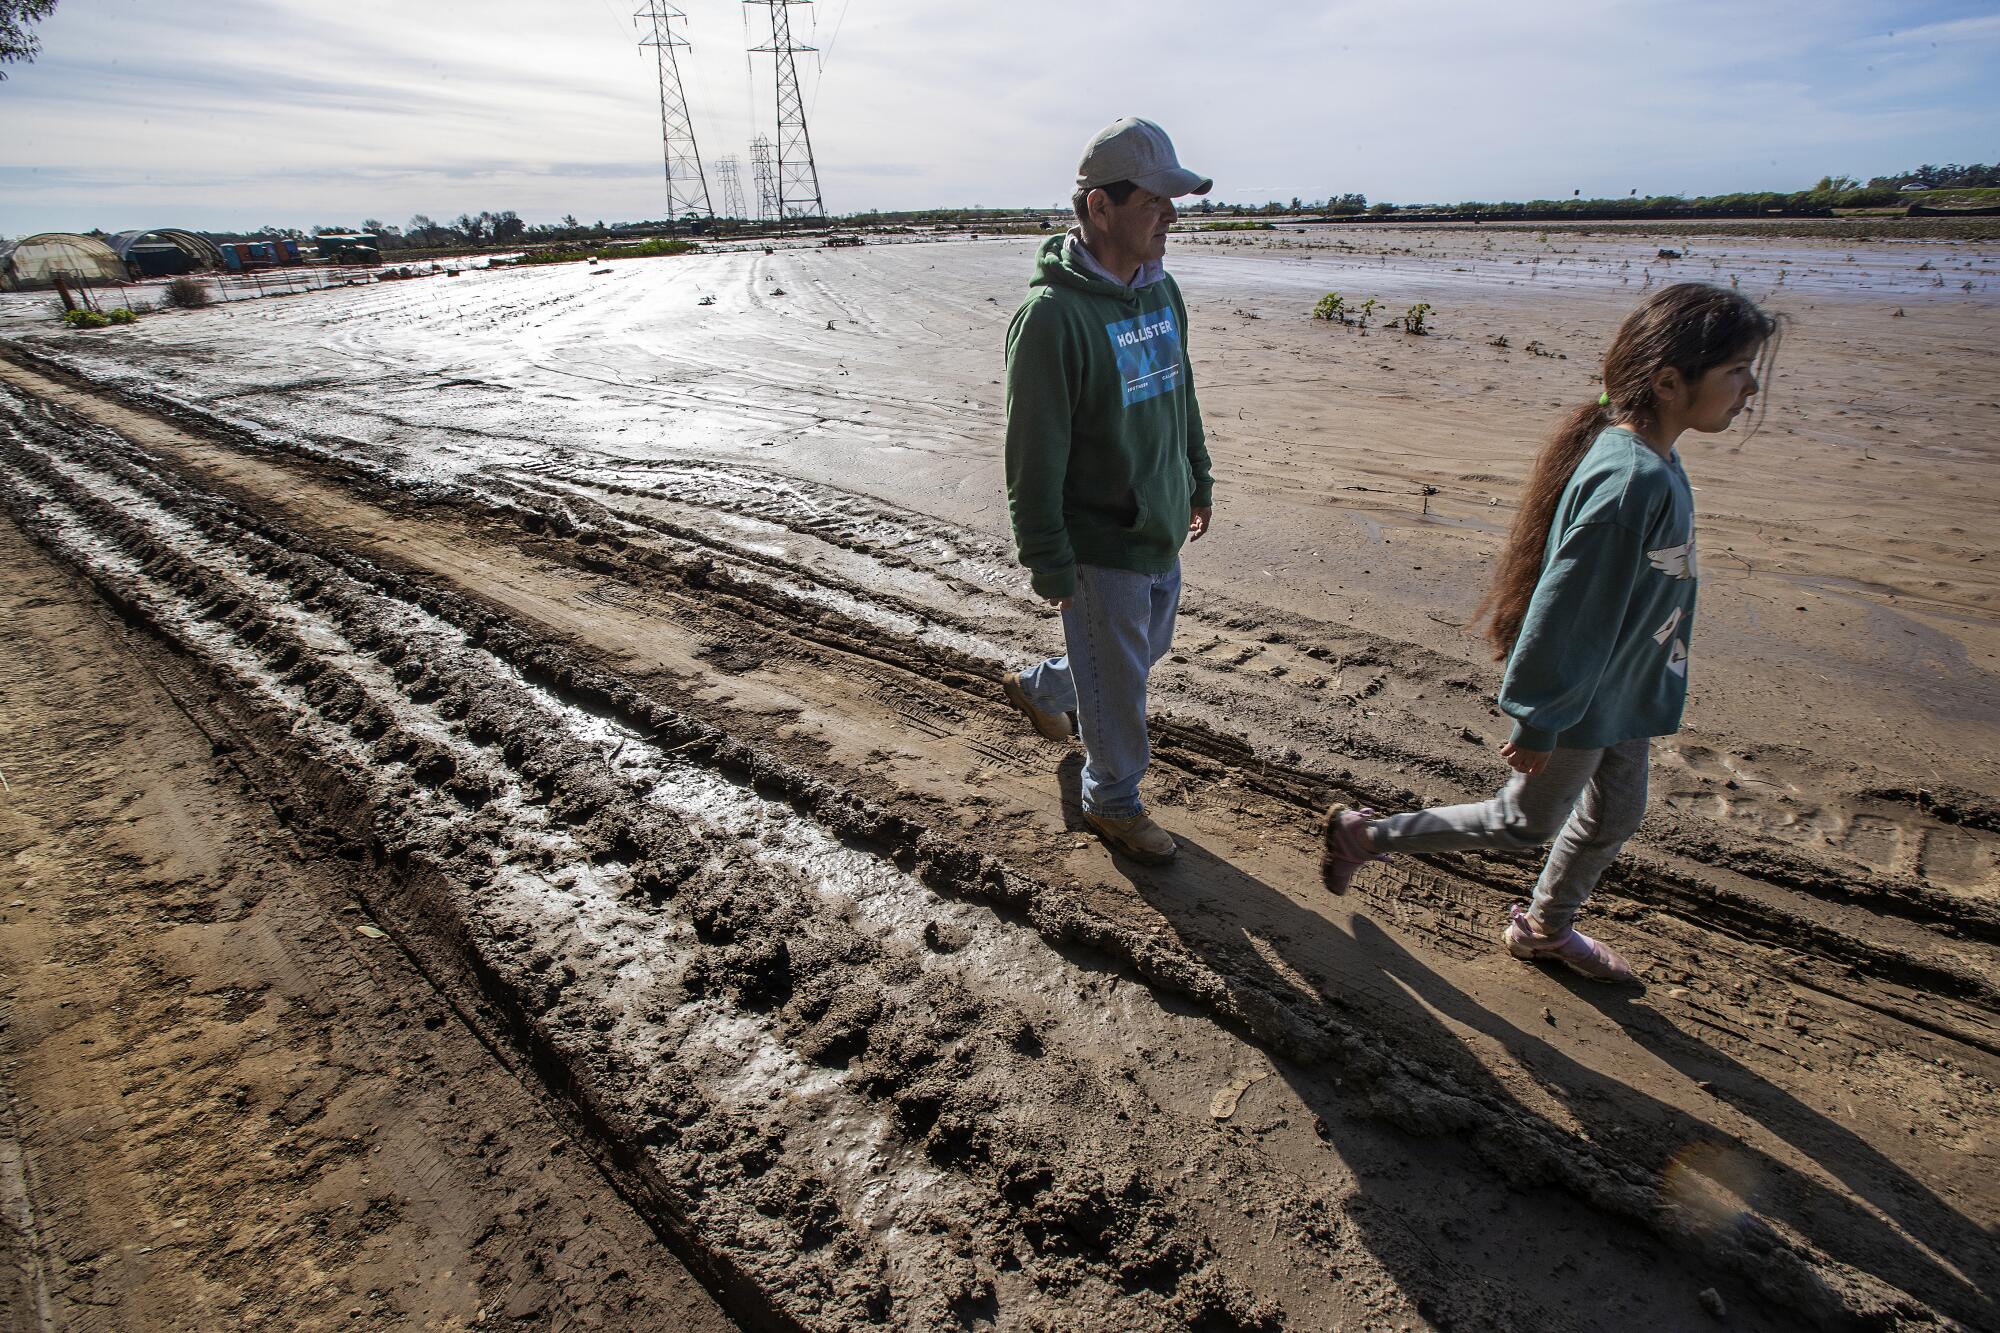 A man and a young girl walk by a muddy field.